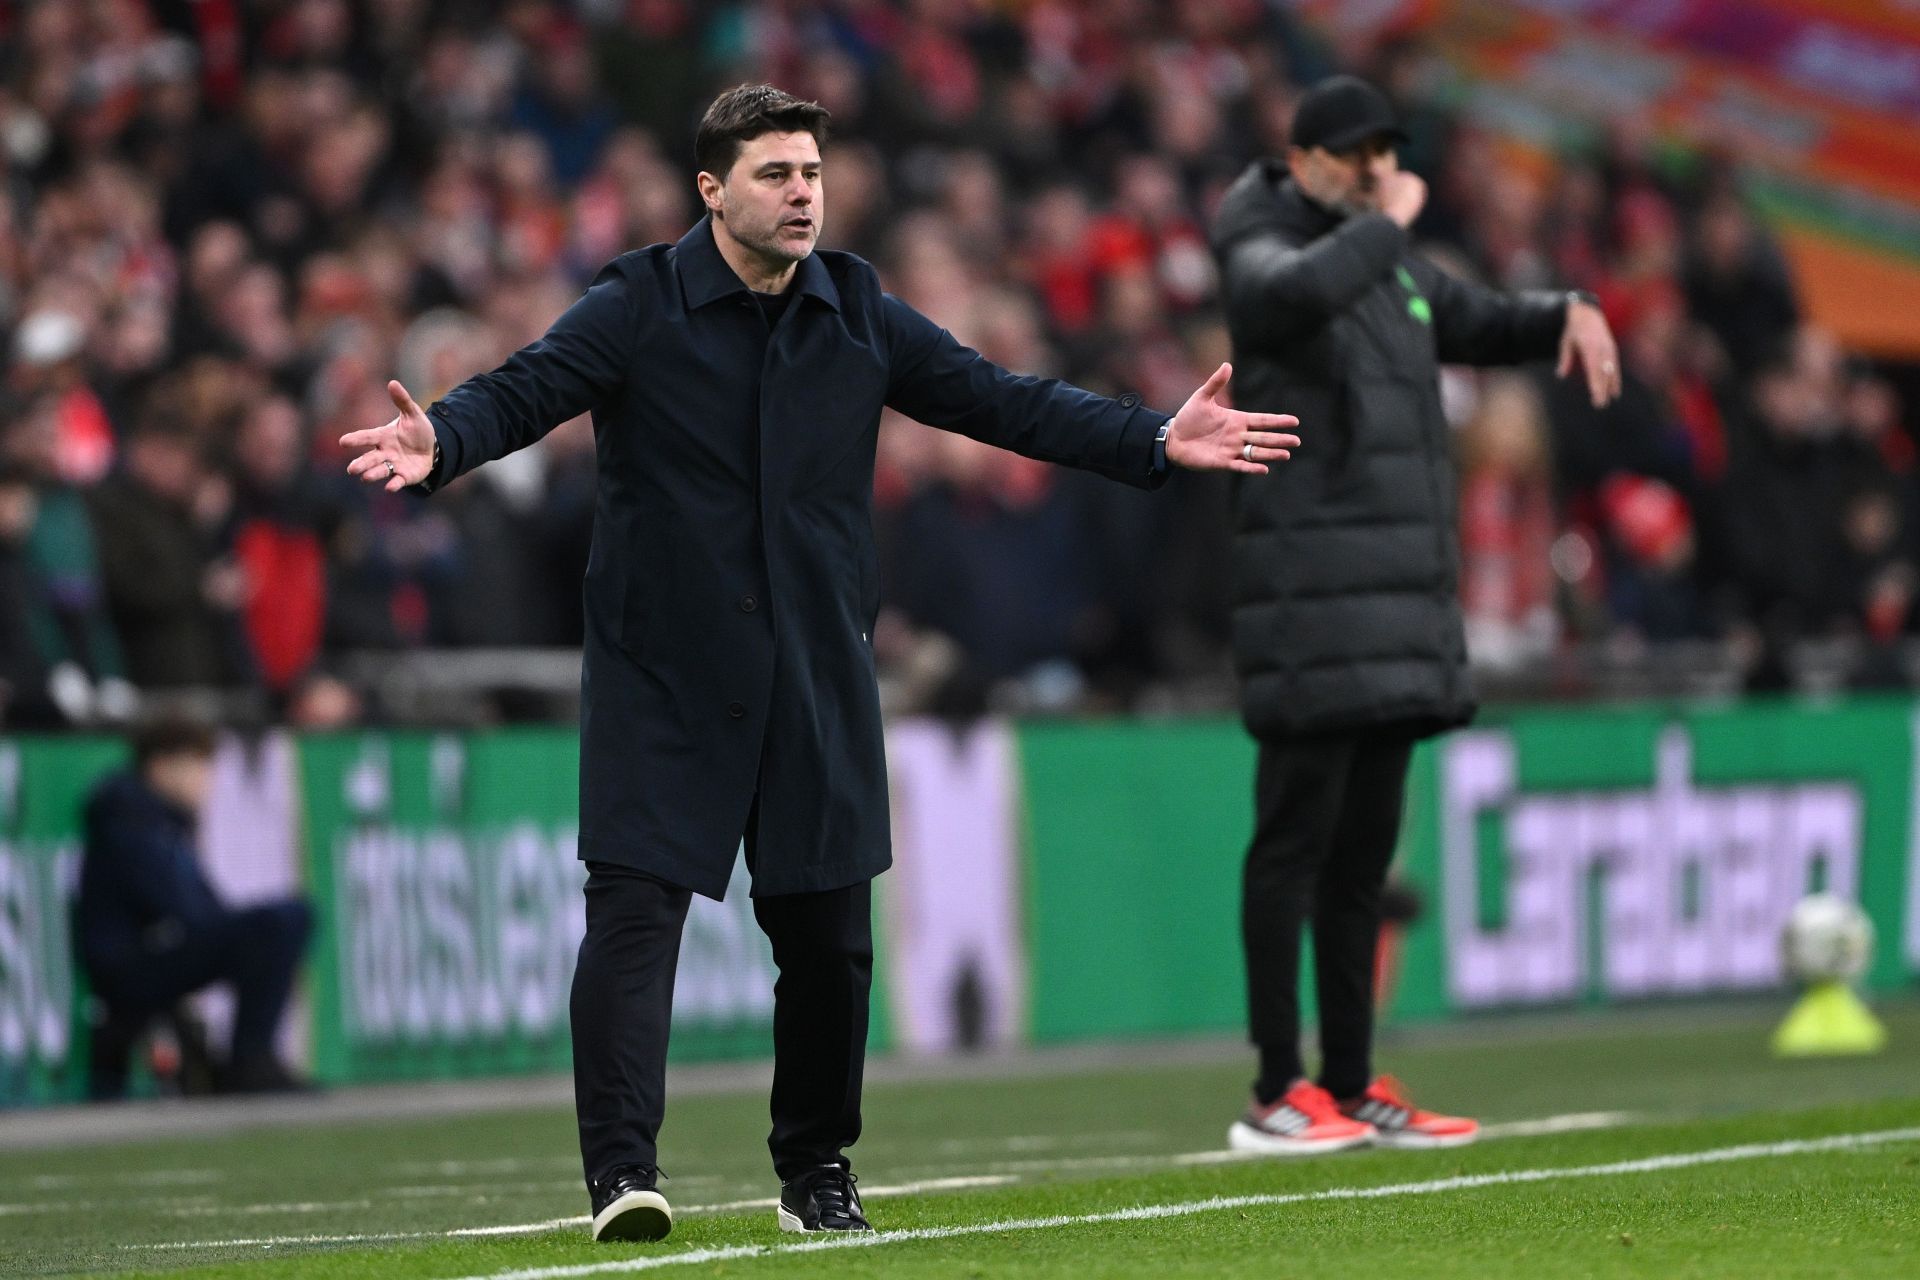 Pochettino asked for patience from the owners.